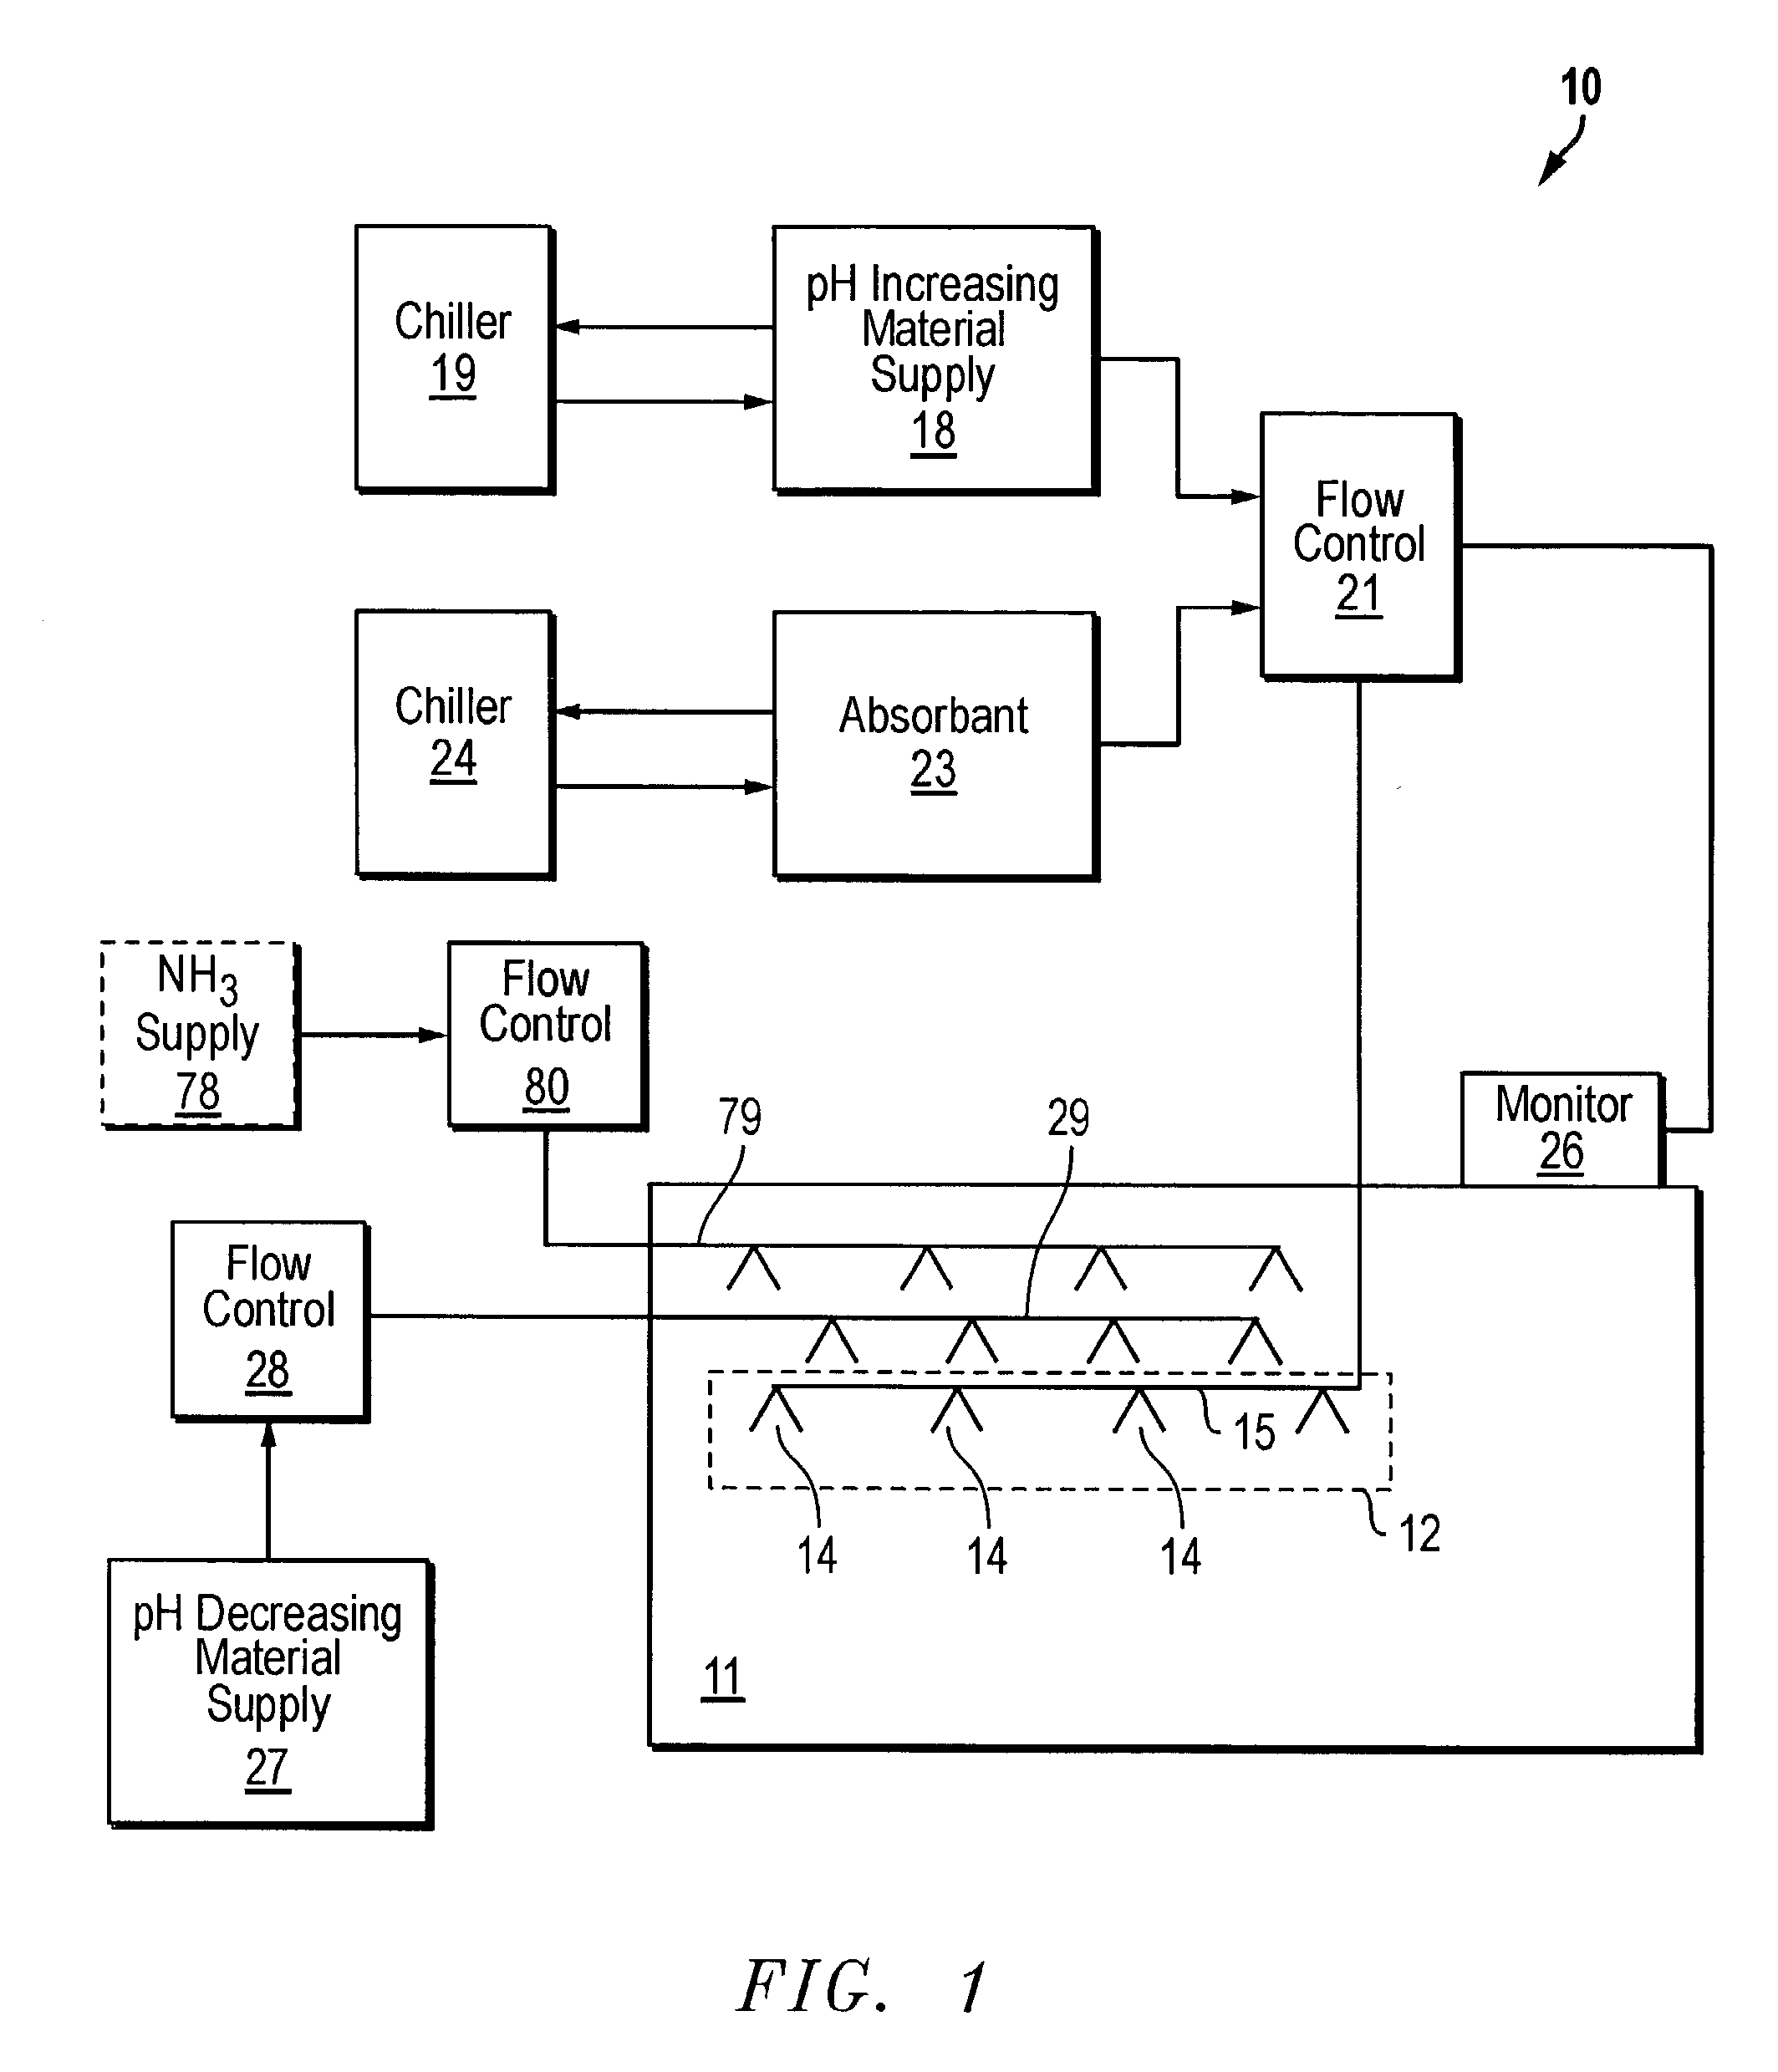 Method for suppressing microbe activity in meat storage enclosures